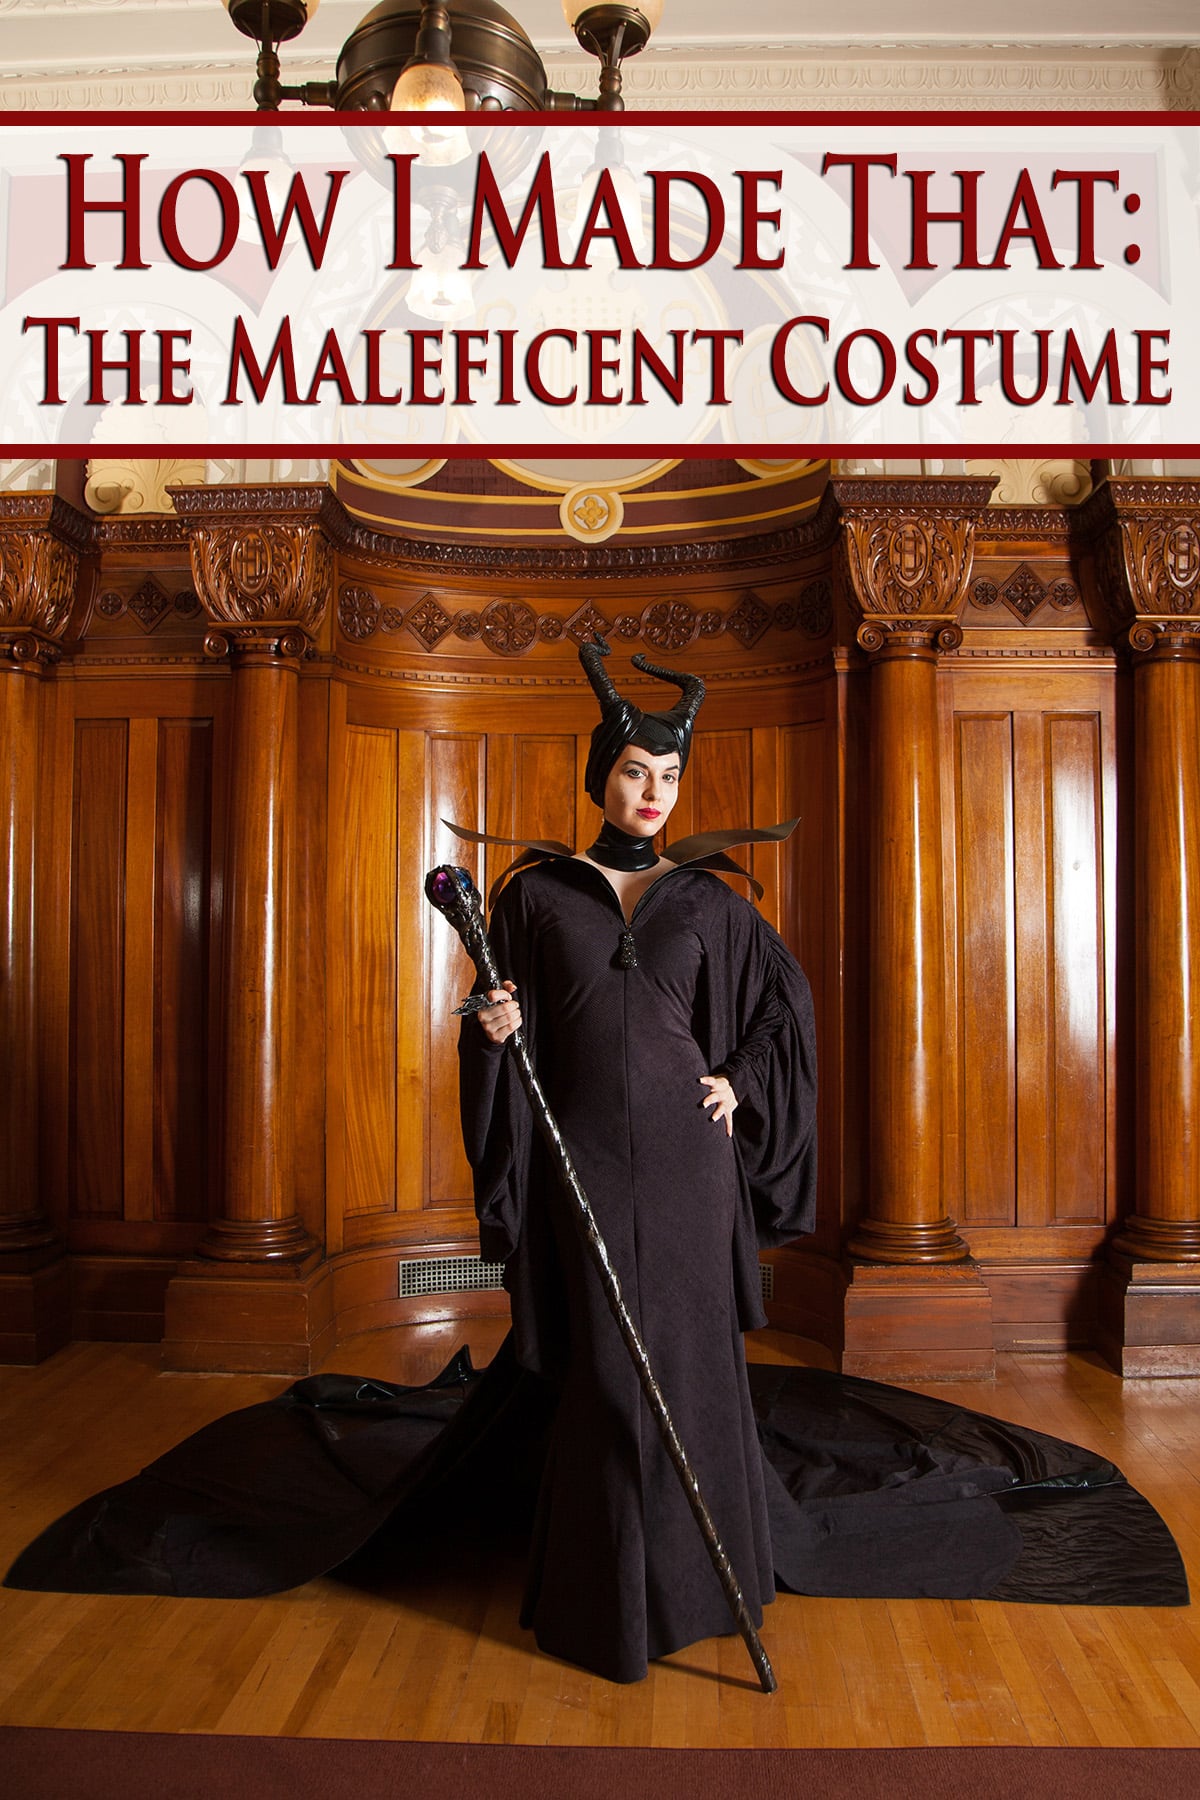 A cosplayer dressed in the full Maleficent costume.